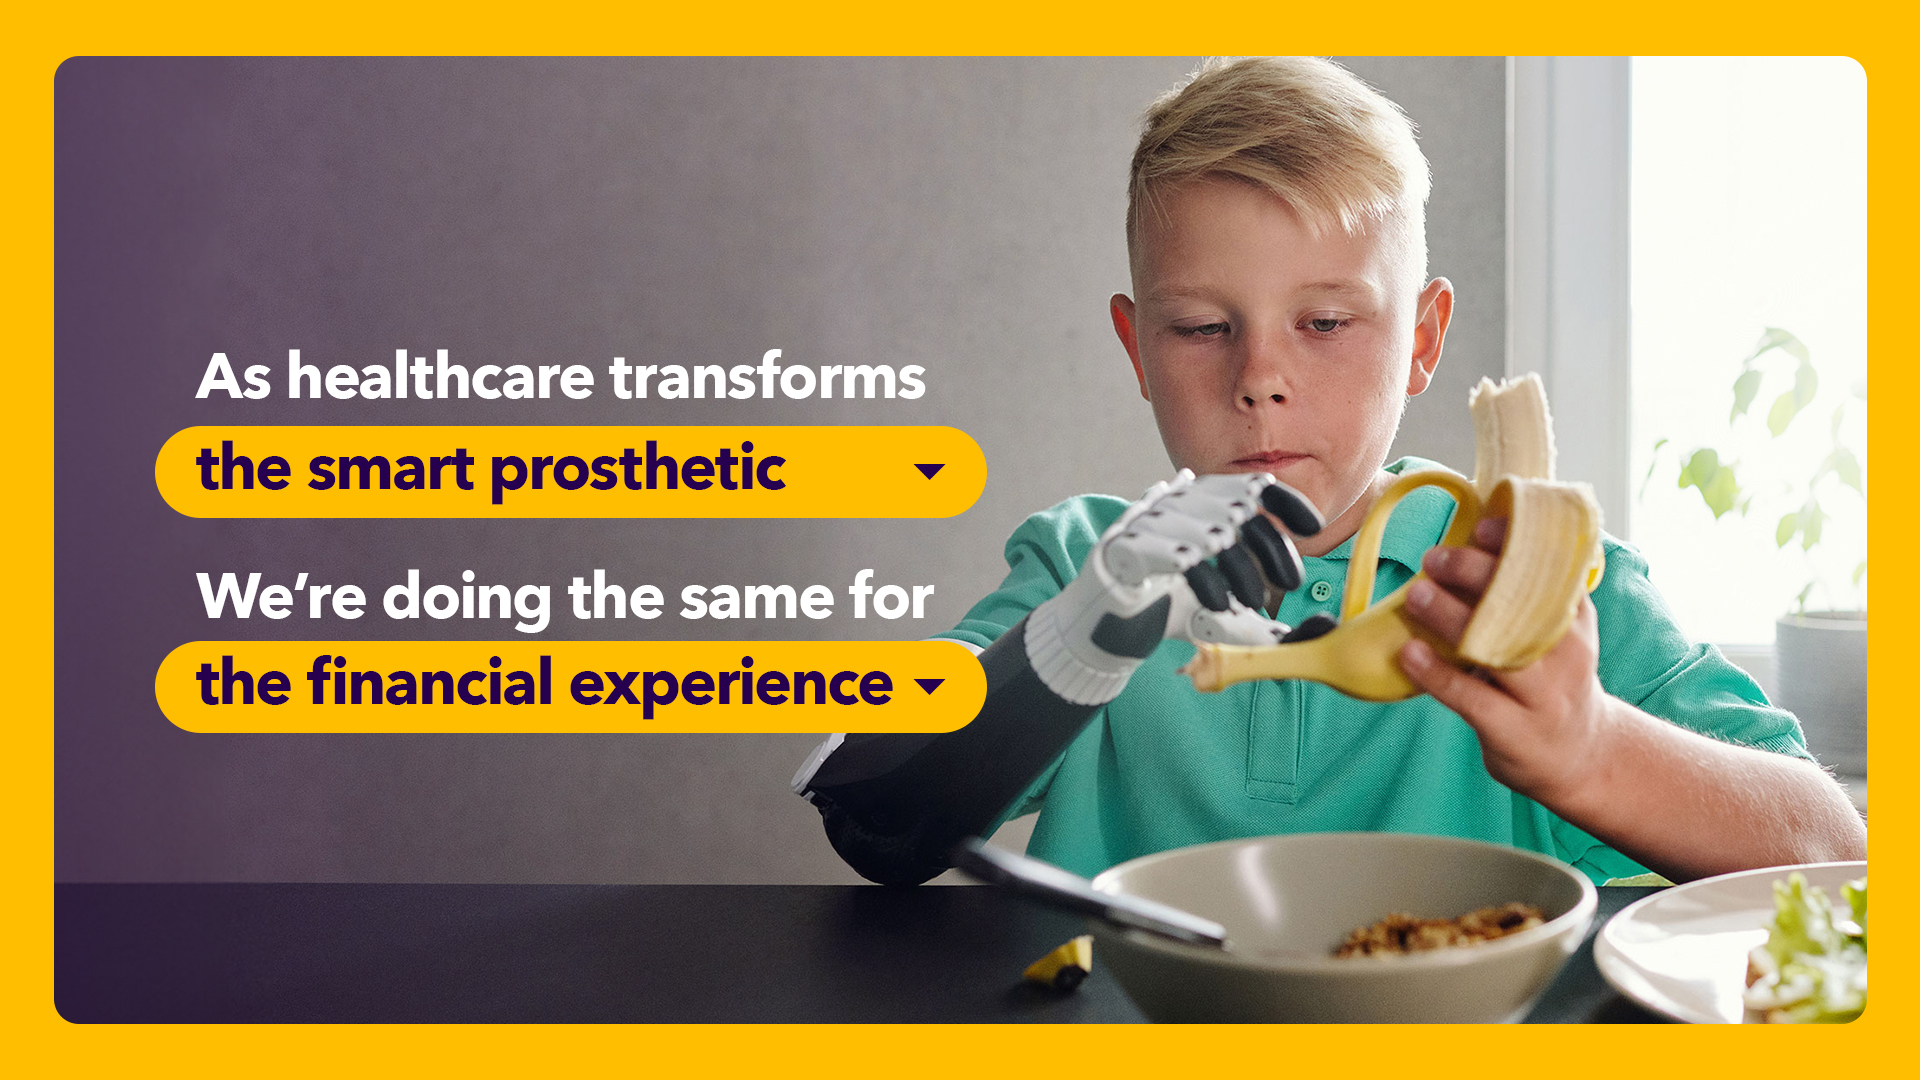 As healthcare transforms the smart prosthetic, we're doing the same for the financial experience.